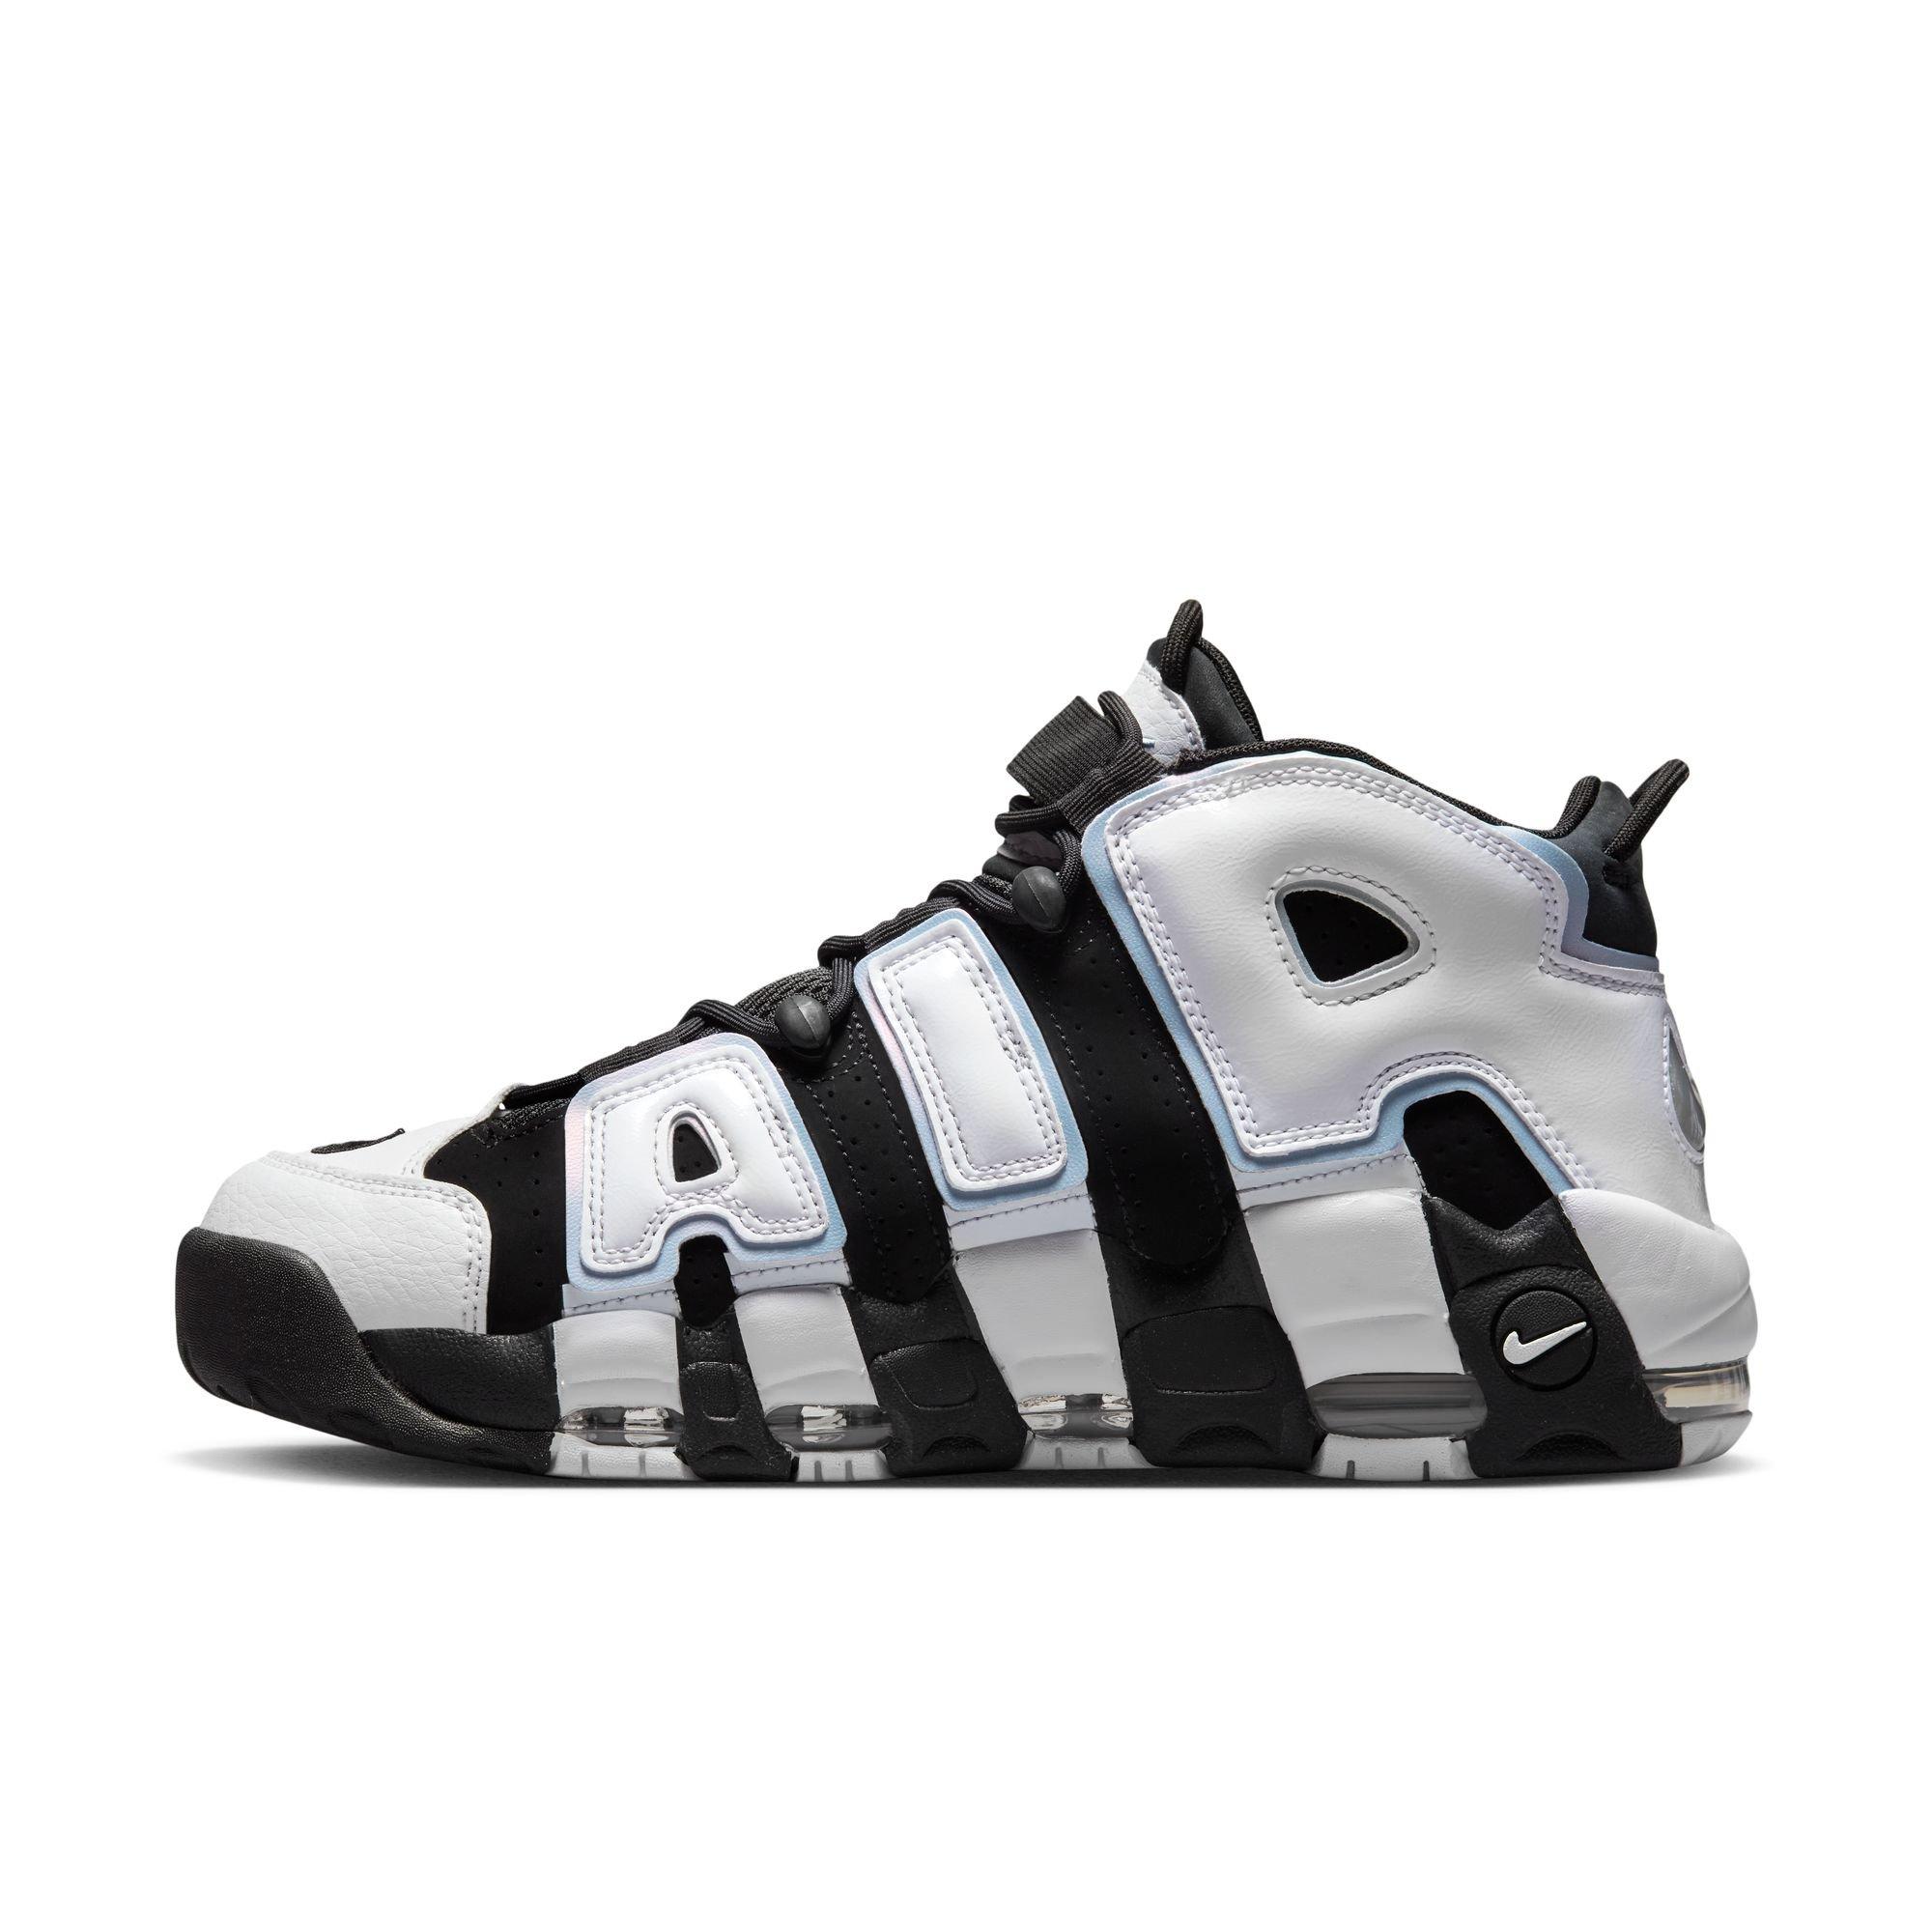 The Nike Air More Uptempo Tri-Color Arrives This Weekend